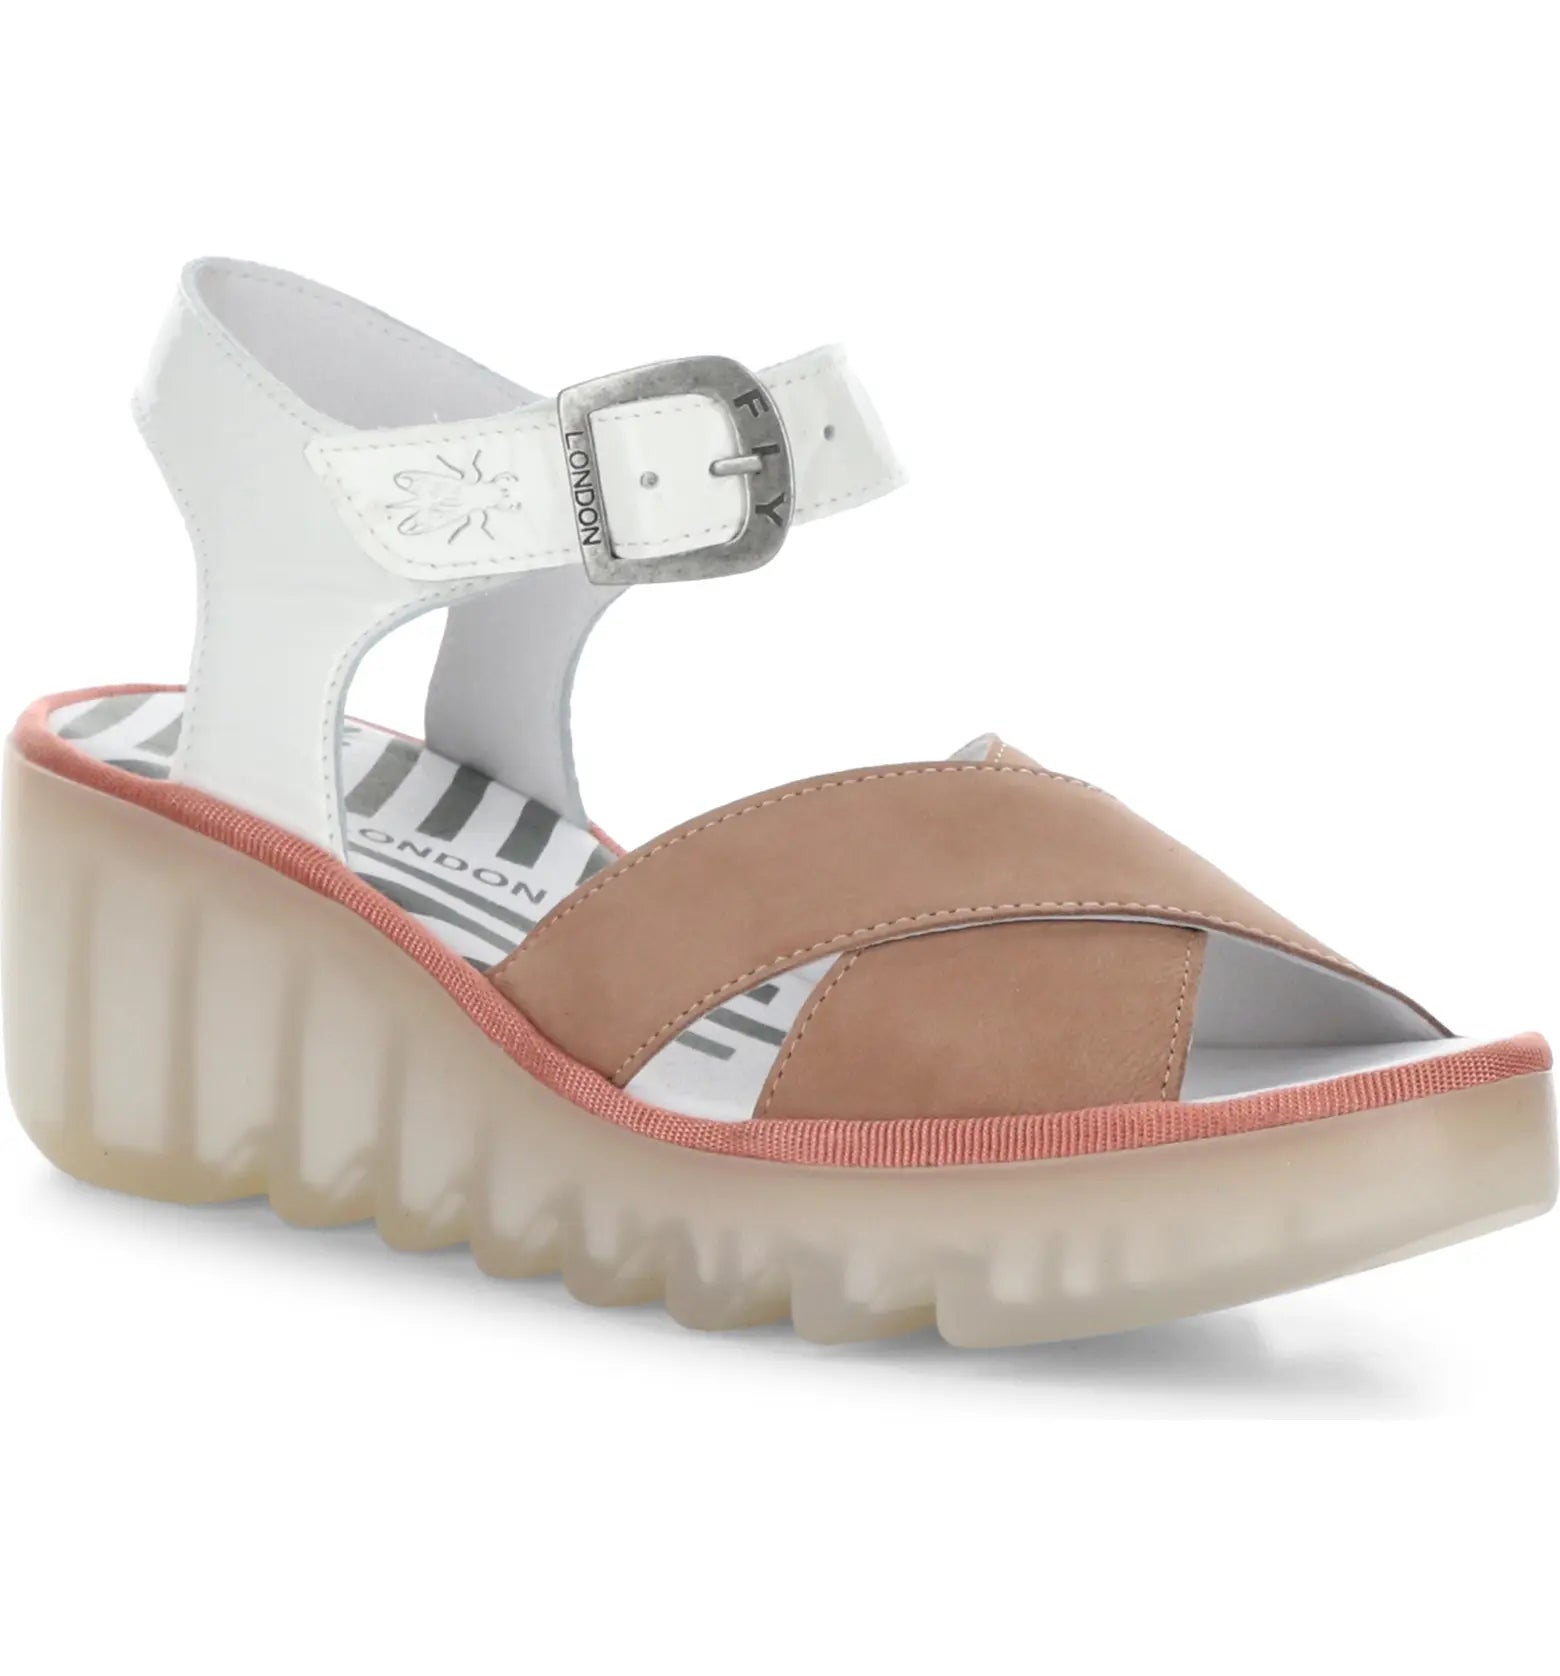 Fly London "Bace" Pink/Off-White - Wedge Sandal